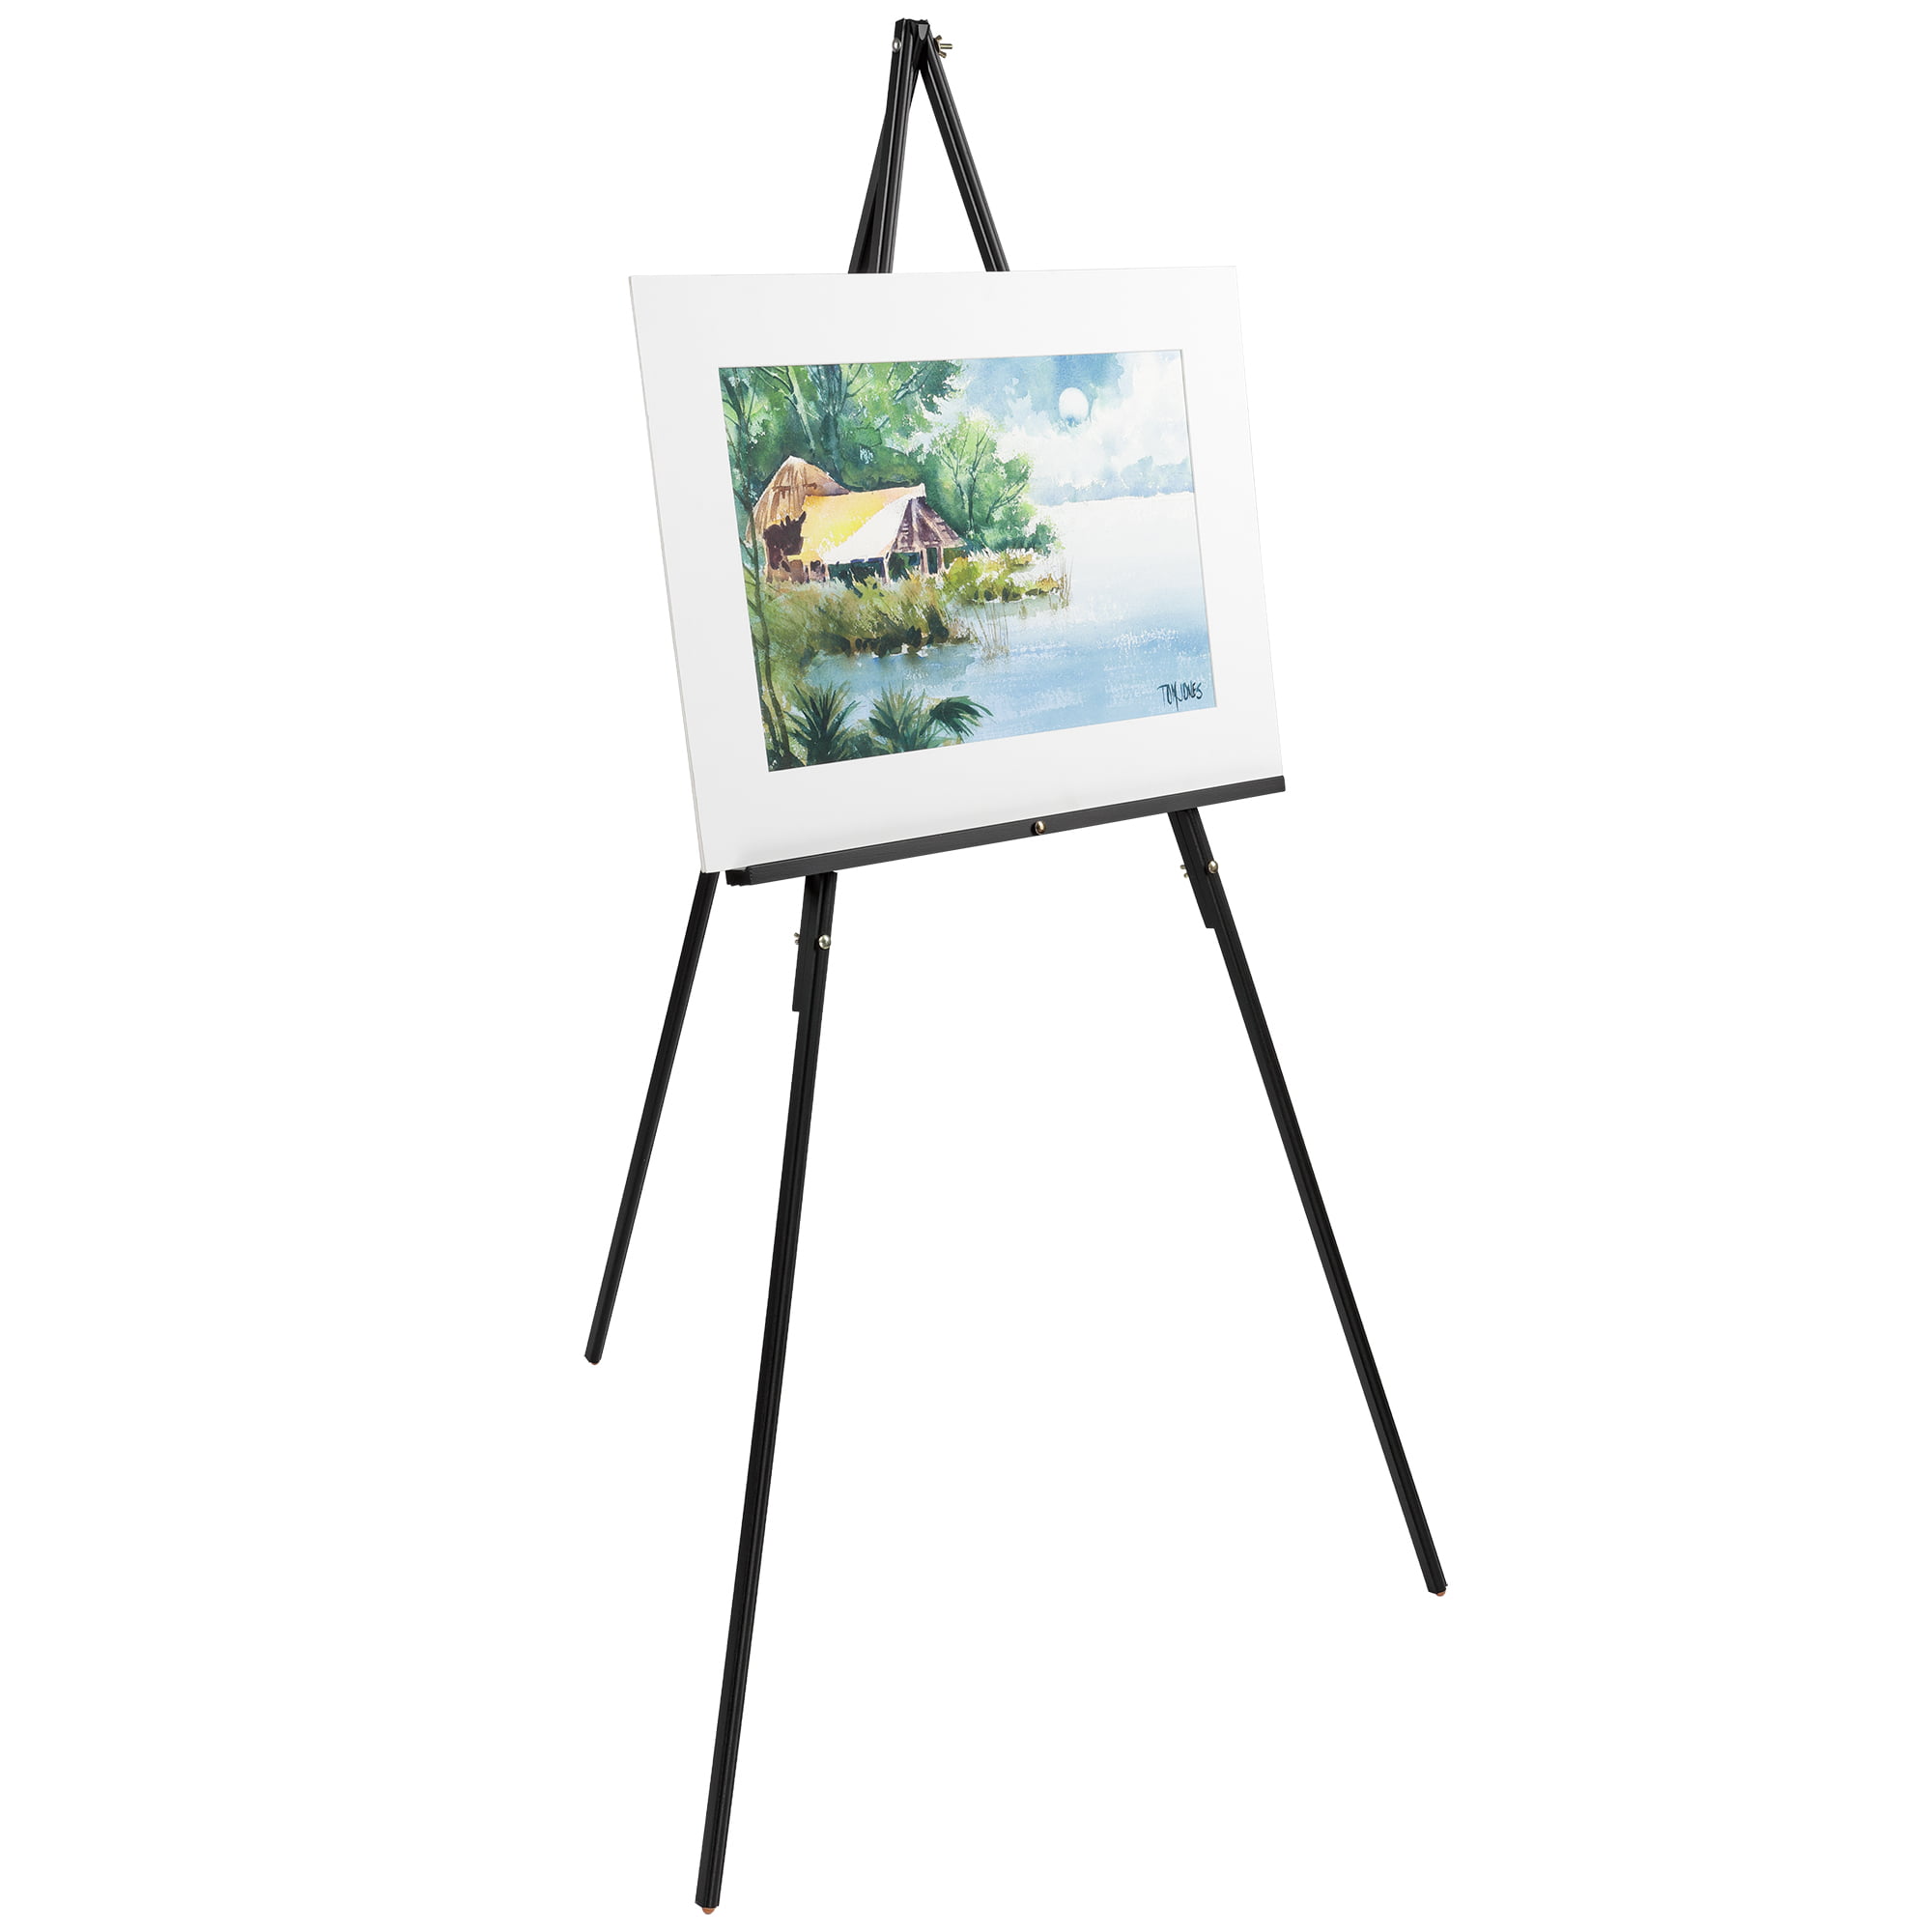 Yesbay Wooden Adjustable Painting Drawing Stand Easel Frame Artist Tripod  Display Shelf,Wood Color 21x28cm